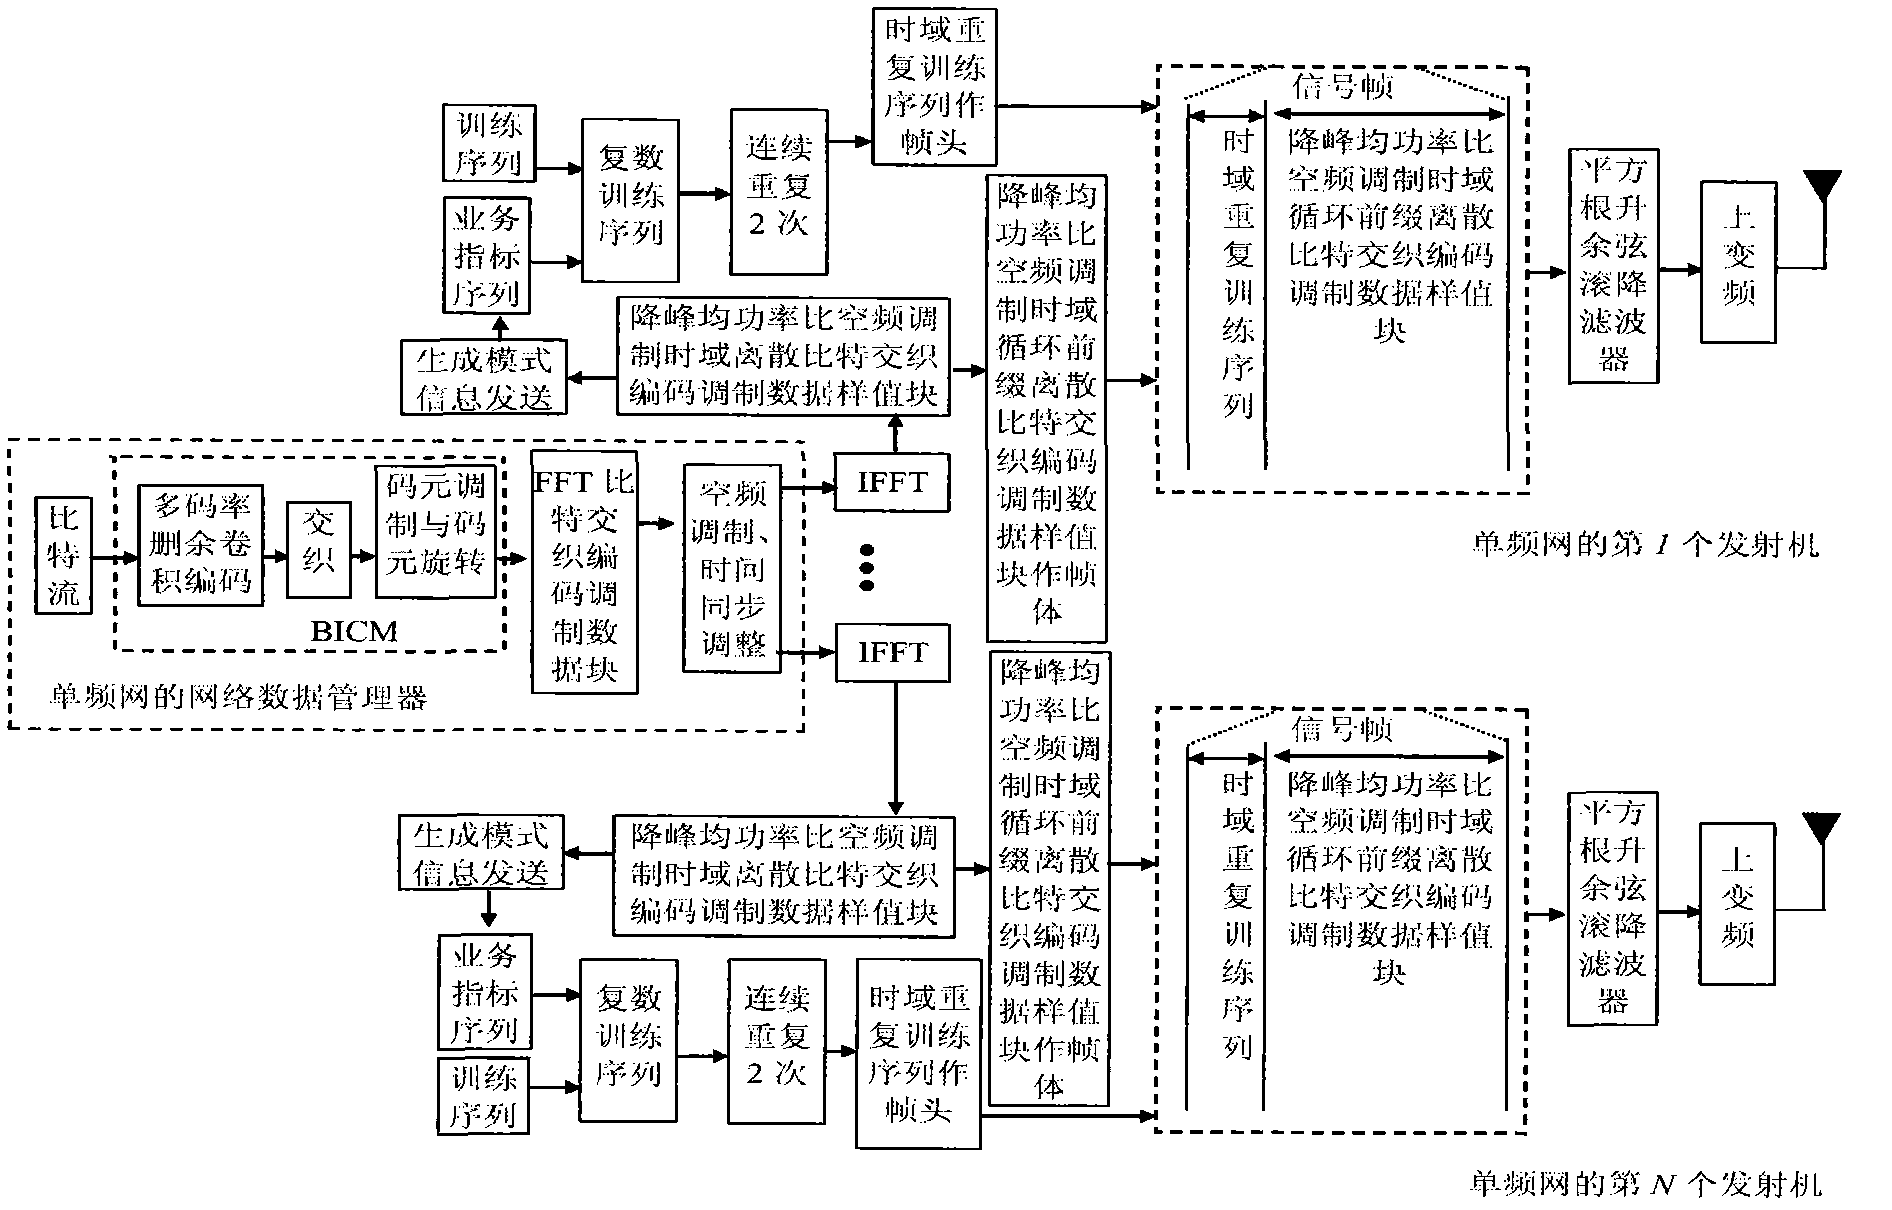 Interference-resistance framing modulation method for mobile signals of multimedia broadcasting single frequency network